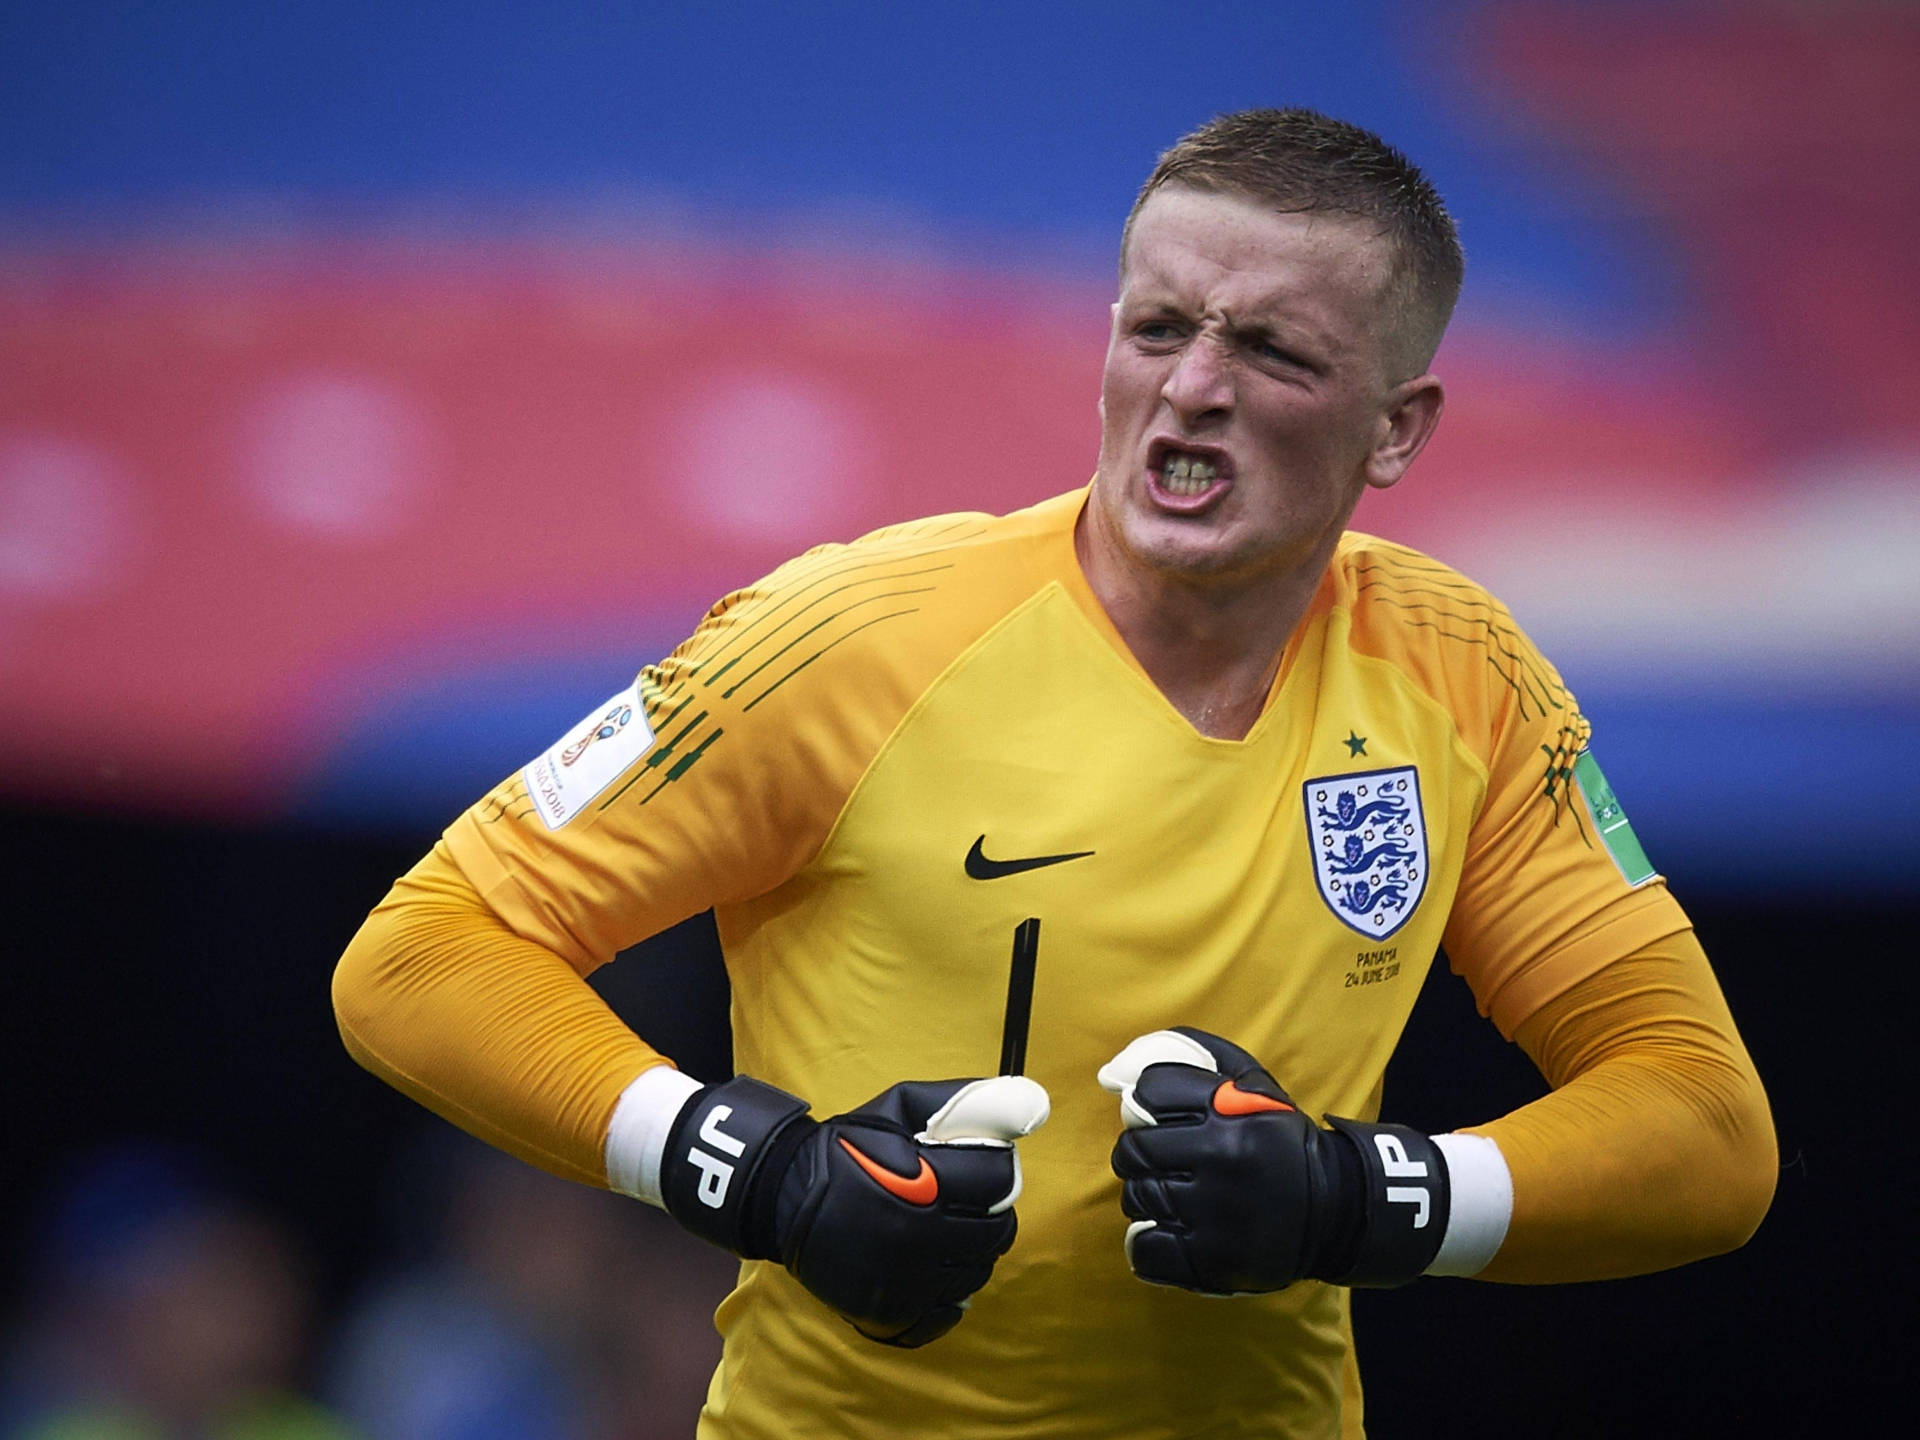 Jordan Pickford With Clenched Fists